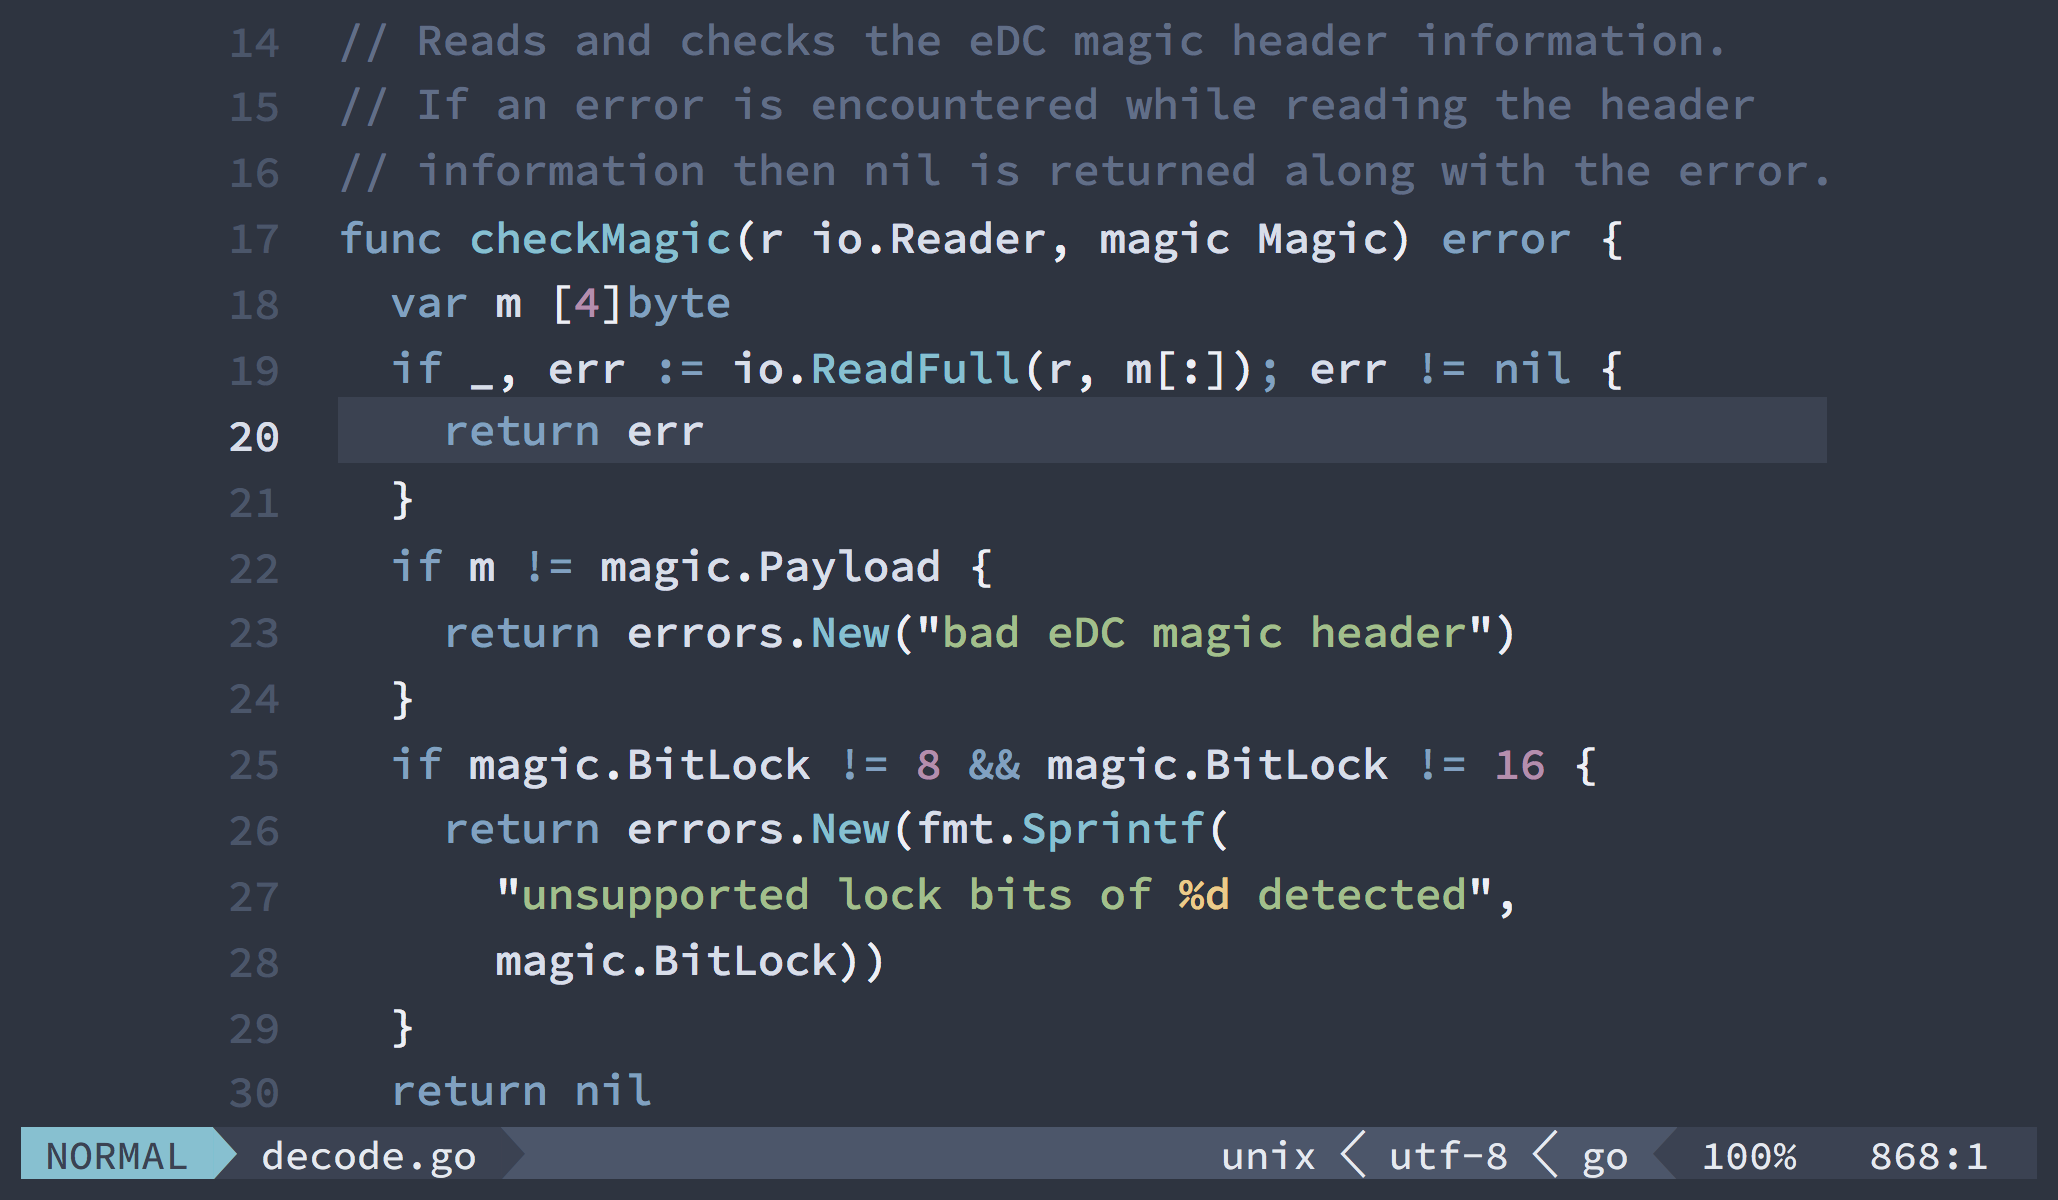 Screenshot showing Vim in terminal mode with a Go function to check for magic file header information